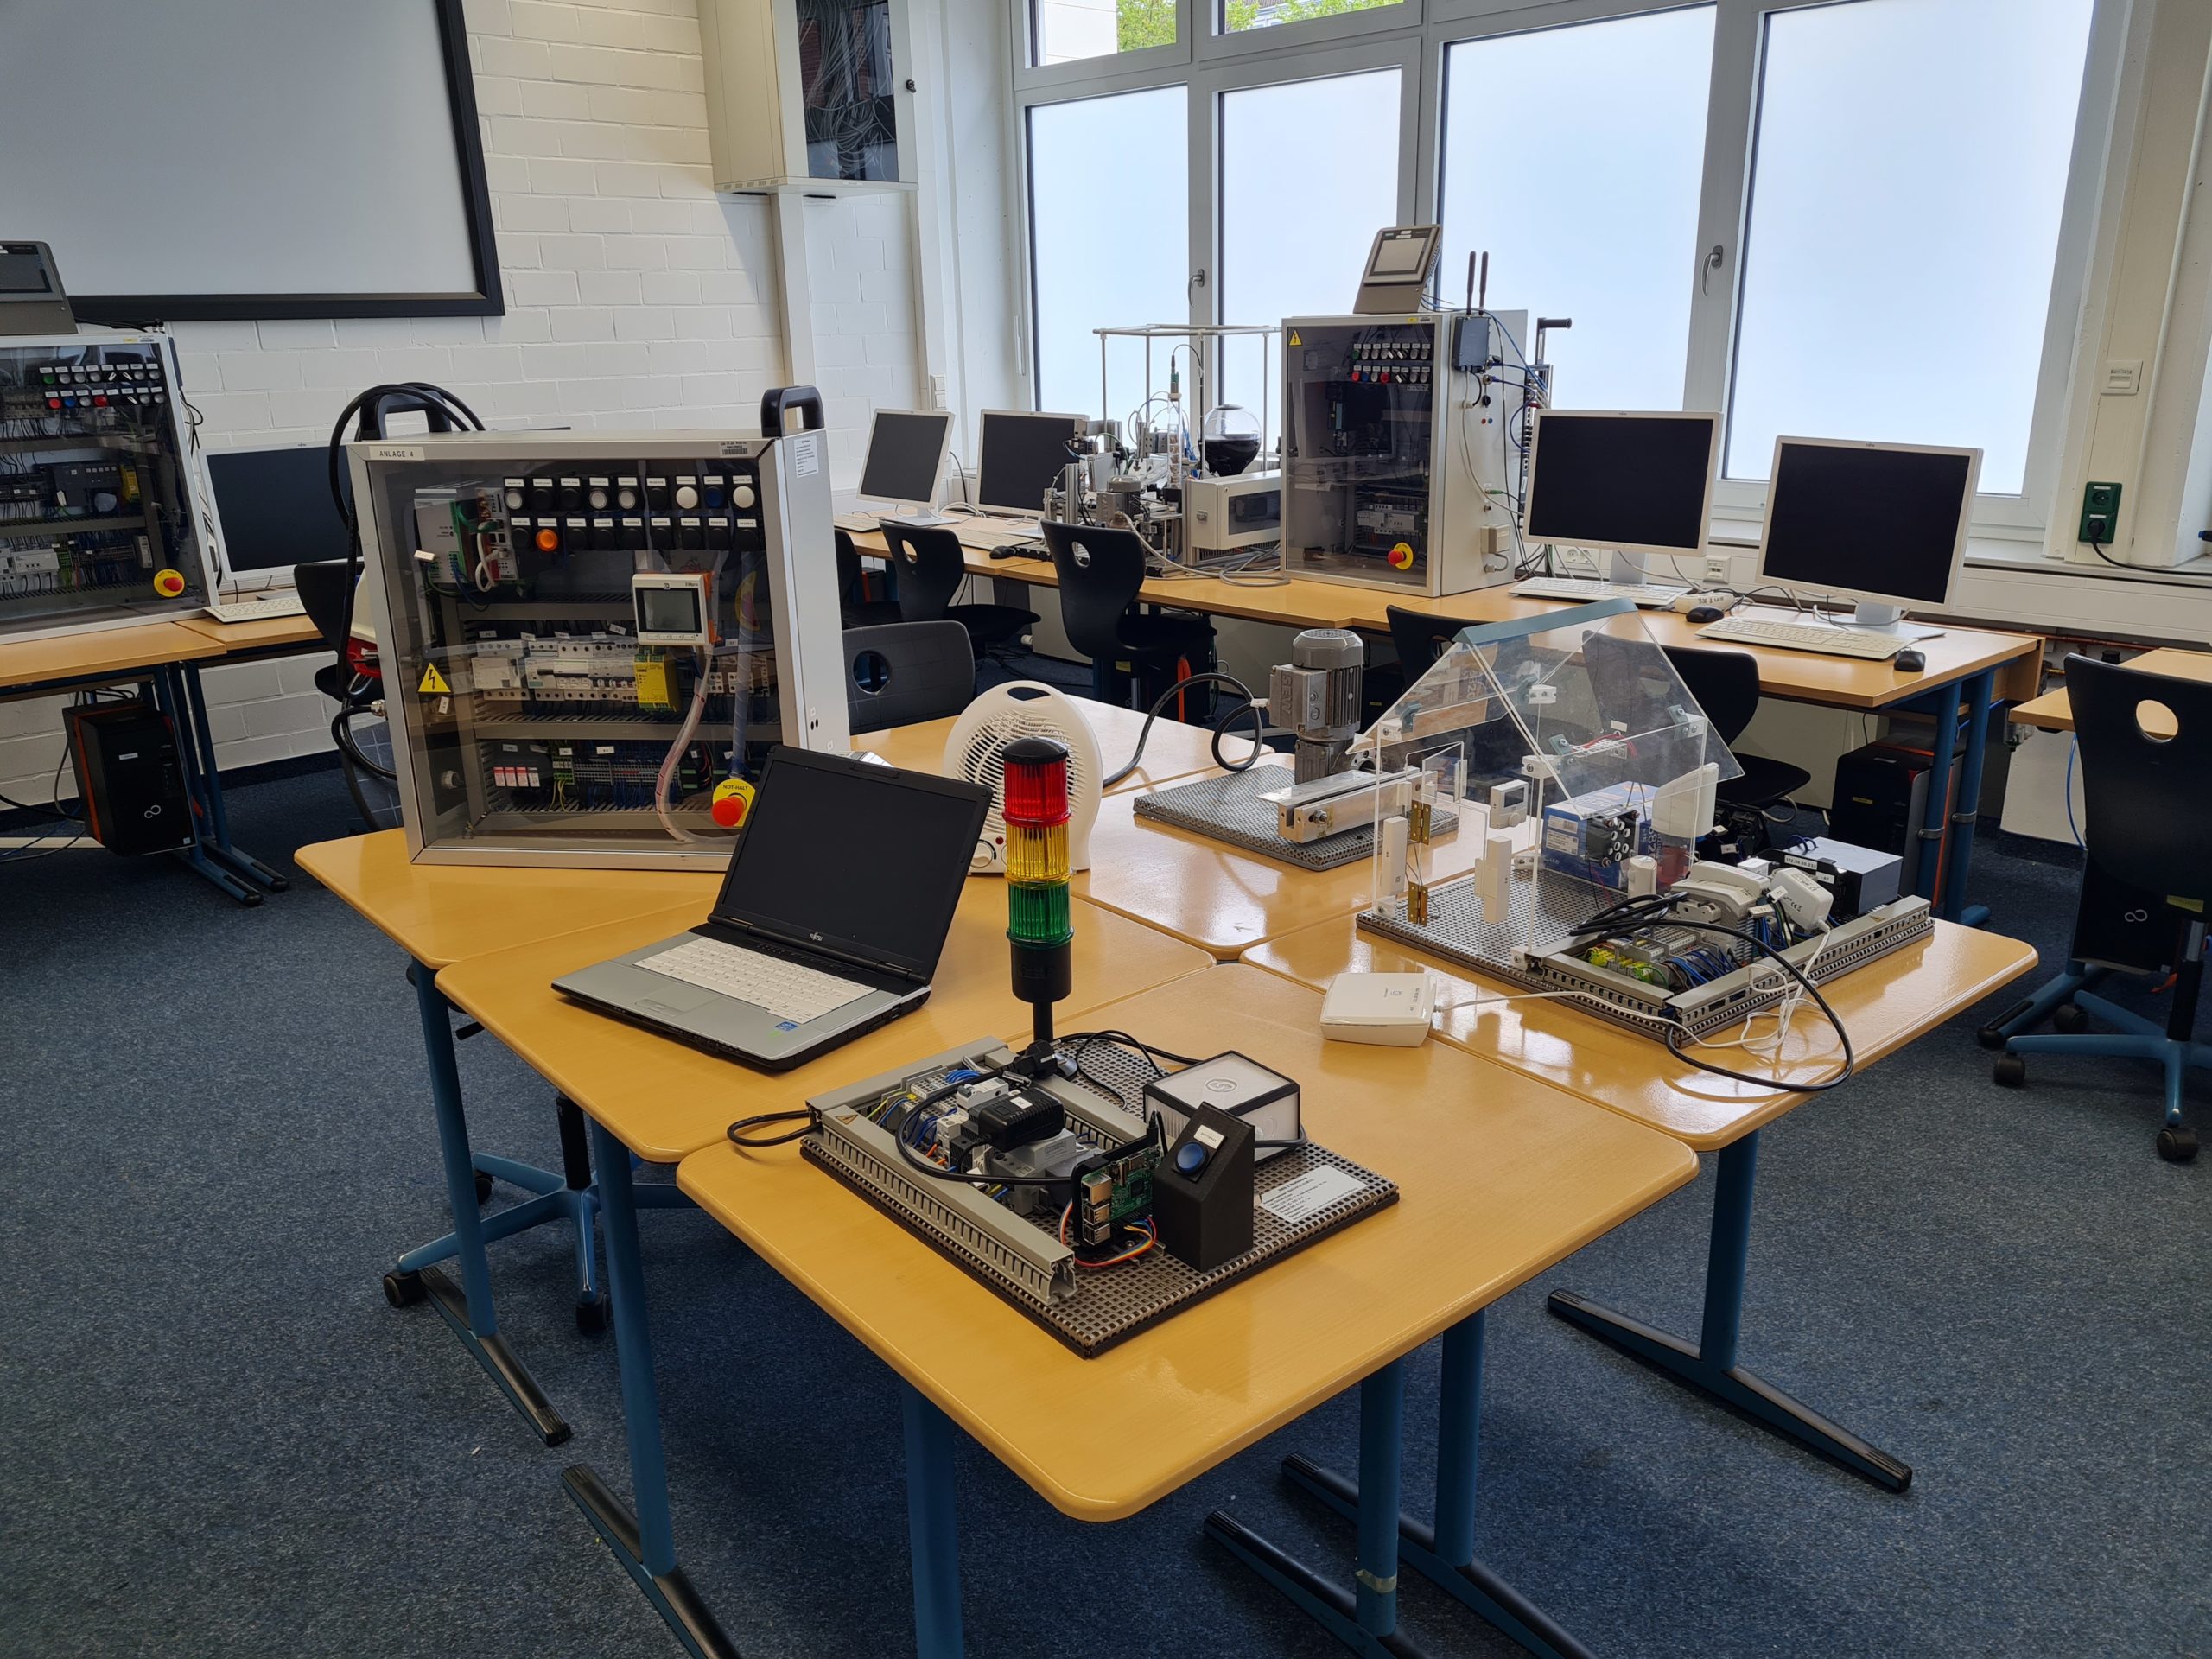 AI use case and school visit in Germany